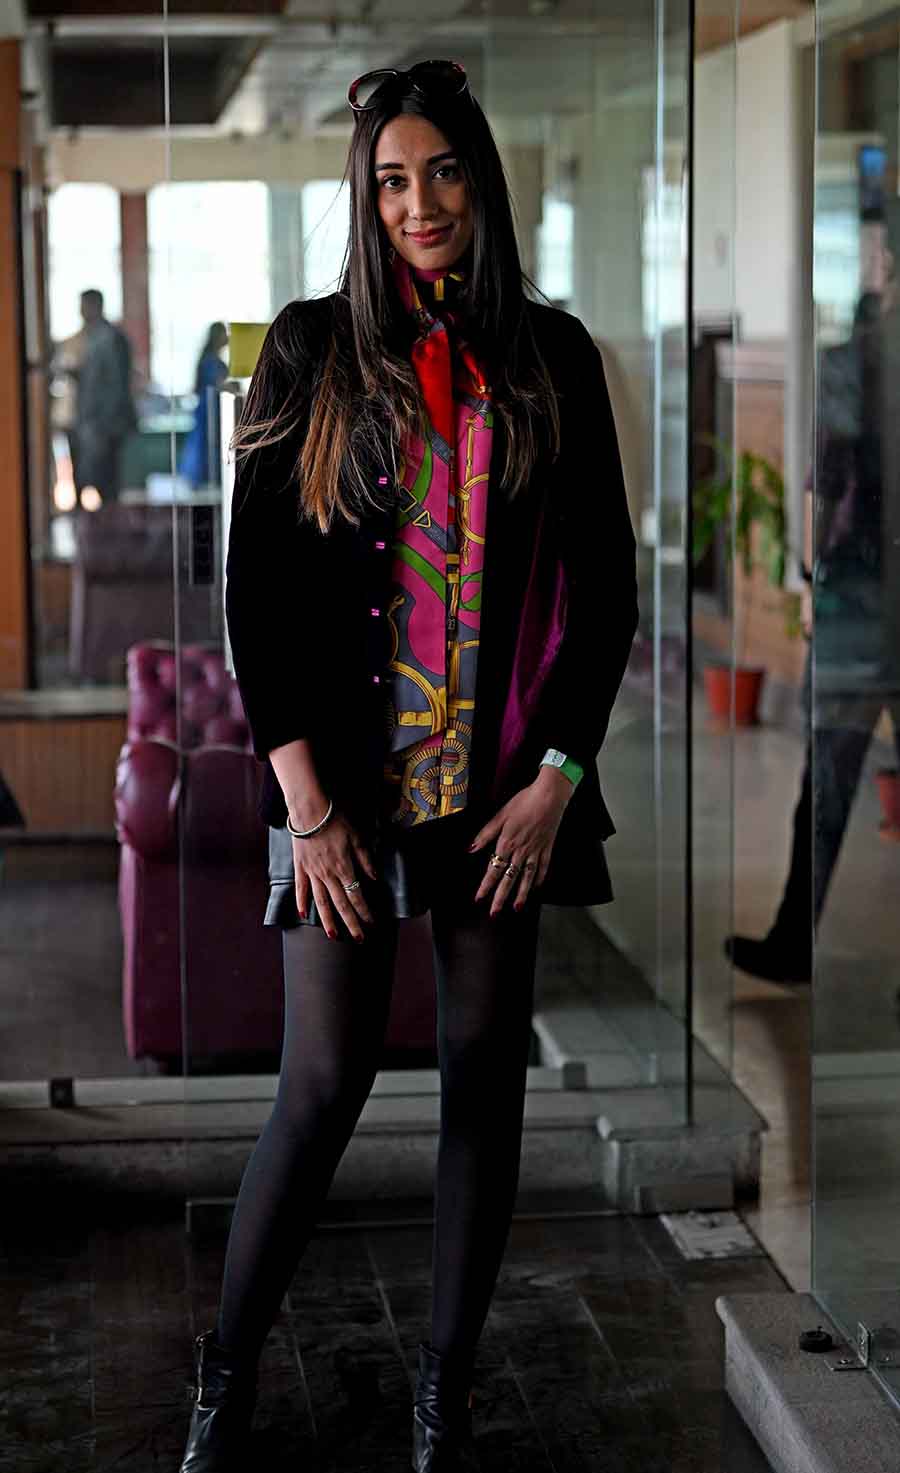 Jasmine Bala (in picture), a regular at the race course since the age of six, adorned an all-black ensemble — a skirt-and-jacket look with sheer stockings and ankle boots — with a vibrant printed scarf as her statement piece.“The Derby day is special with horses from across India and significant prize money,” she said about the day’s races